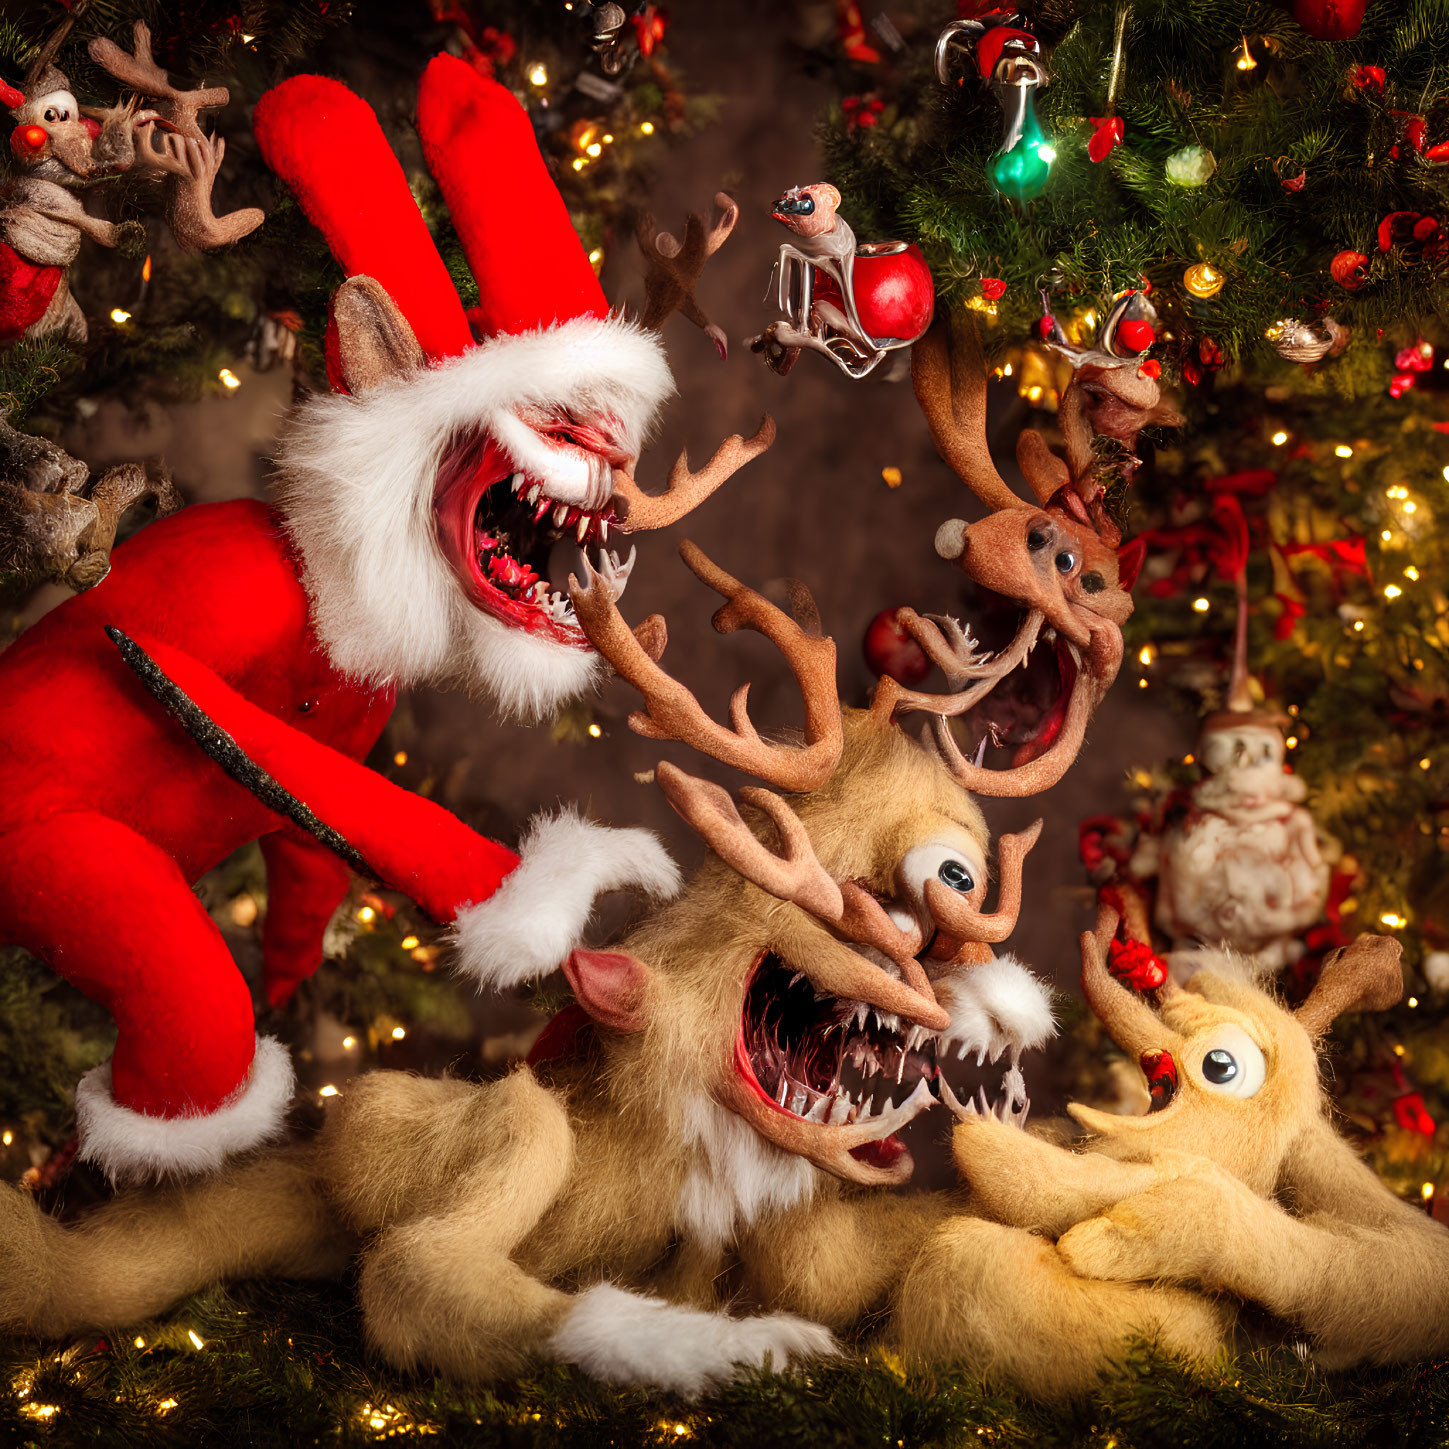 Christmas-themed plushies with oversized, humorous teeth in festive setting